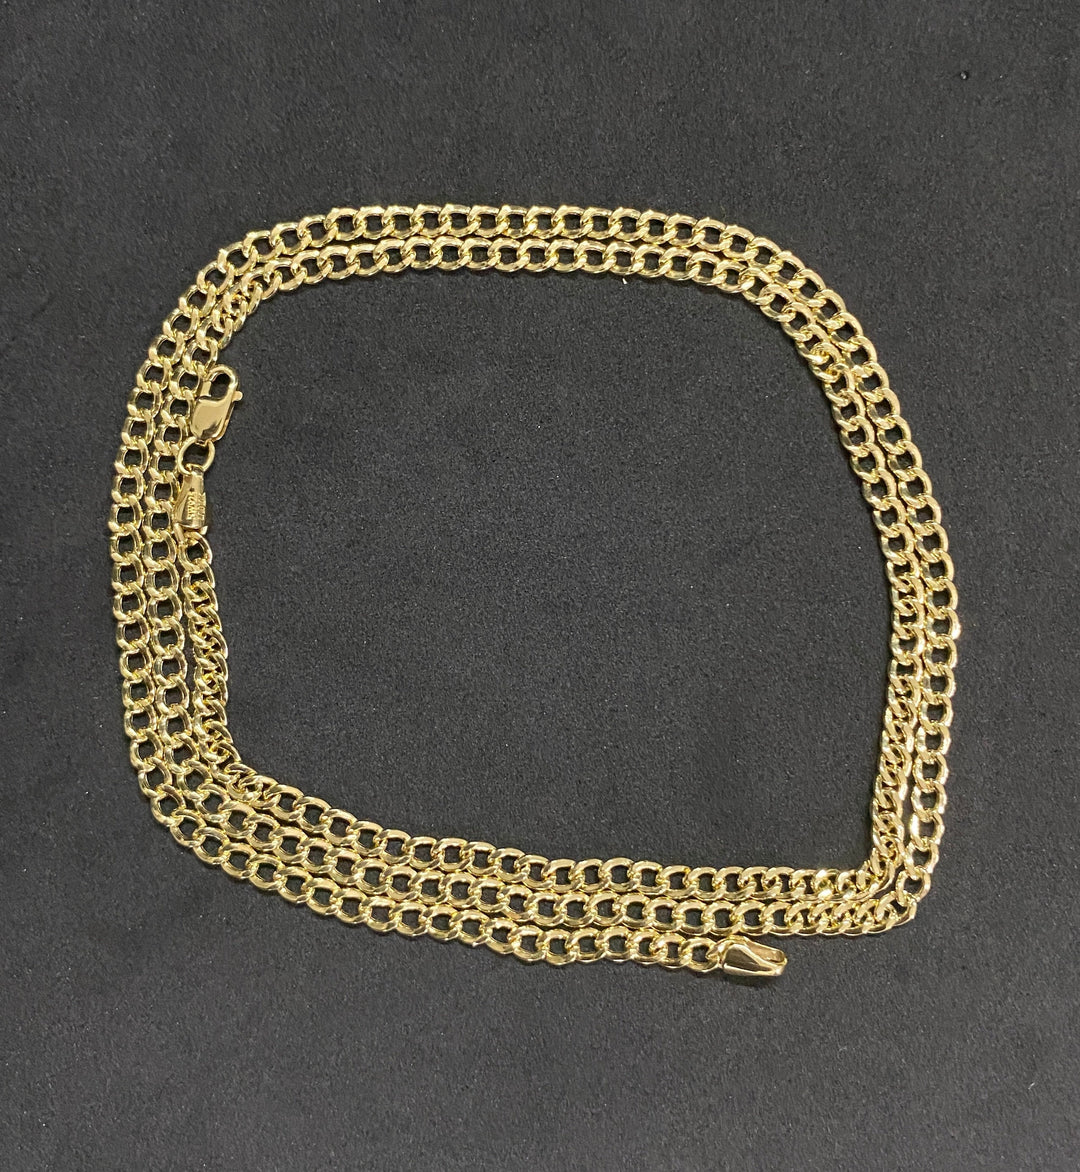 2.5mm Solid 10K Yellow Gold .925 Sterling Silver Miami Curb Link Chain 2.5mm 16"-24"